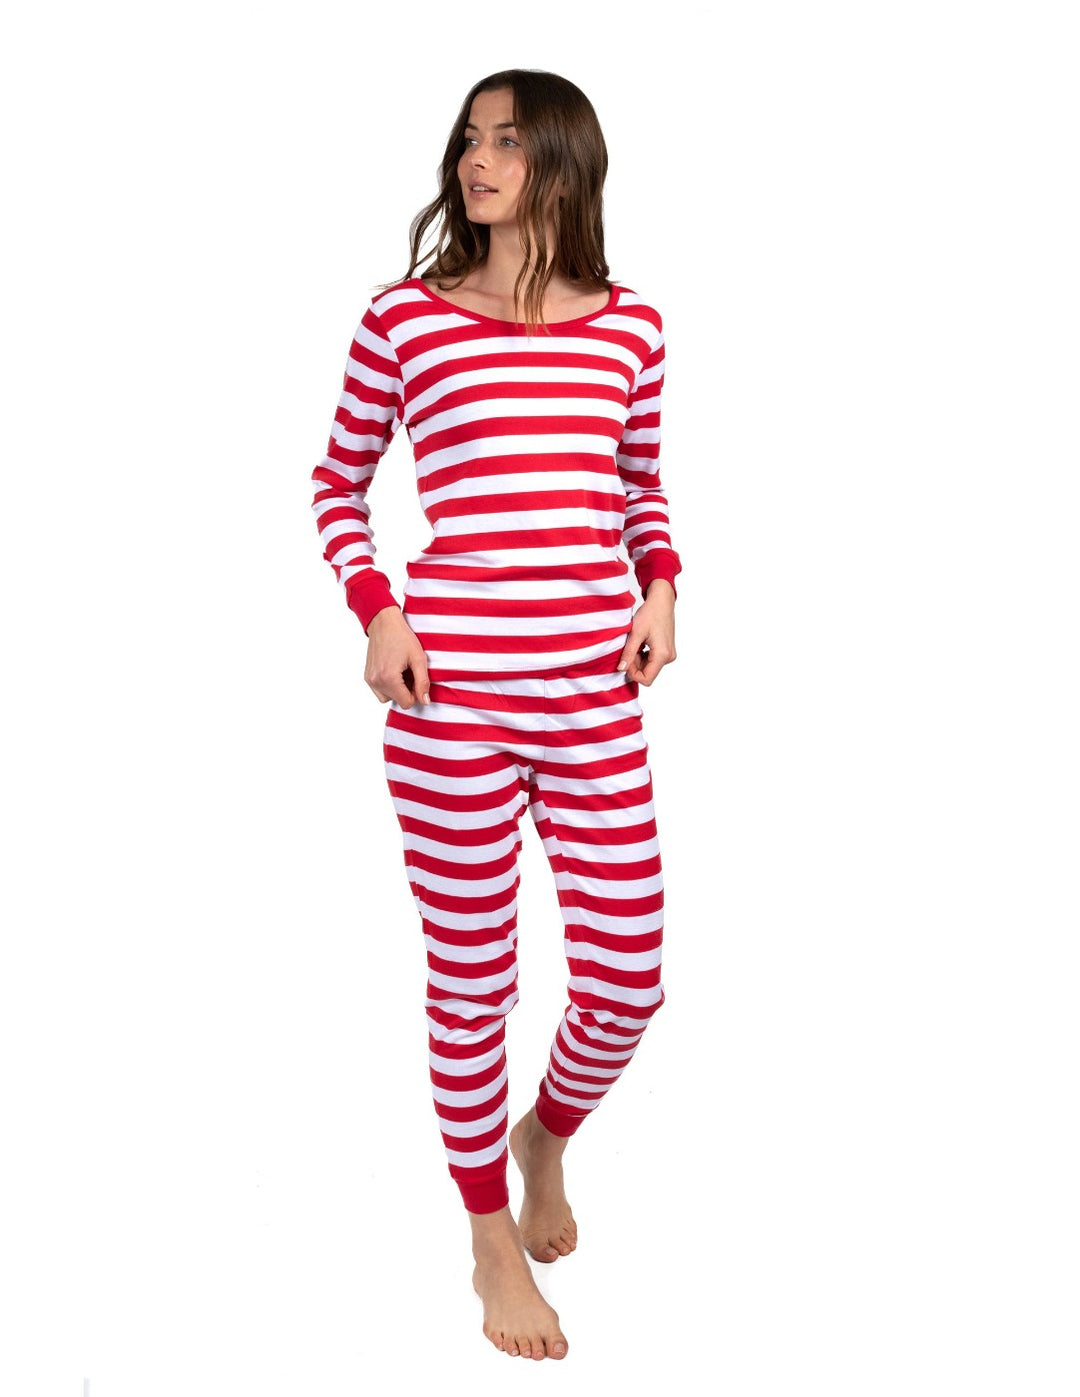 red and white striped women's pajamas